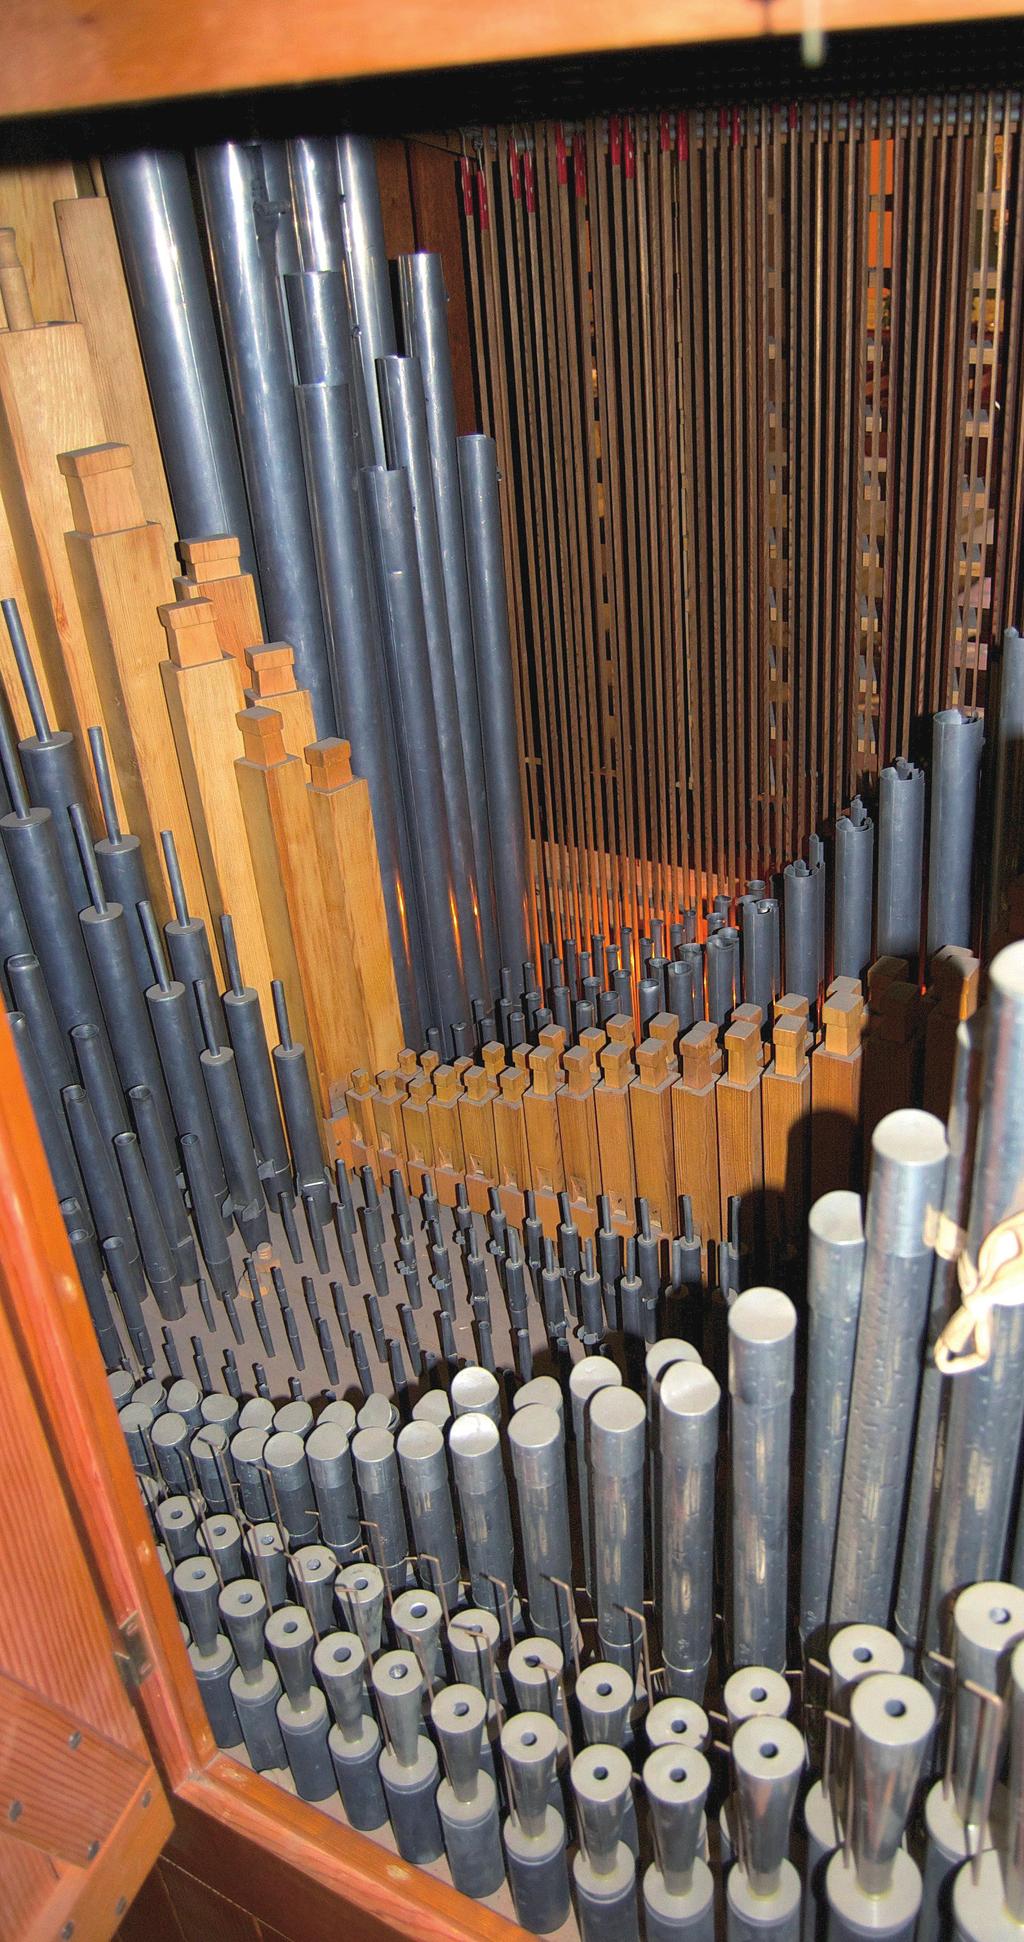 The Nigel Church organ Nigel Church specification Great (CC g, 56 notes) Principal Chimney Flute Spitz Flute Nazard Fifteenth Tierce Echo to Great (by pedal) /3 13/5 IV V Echo (enclosed, 56 notes)